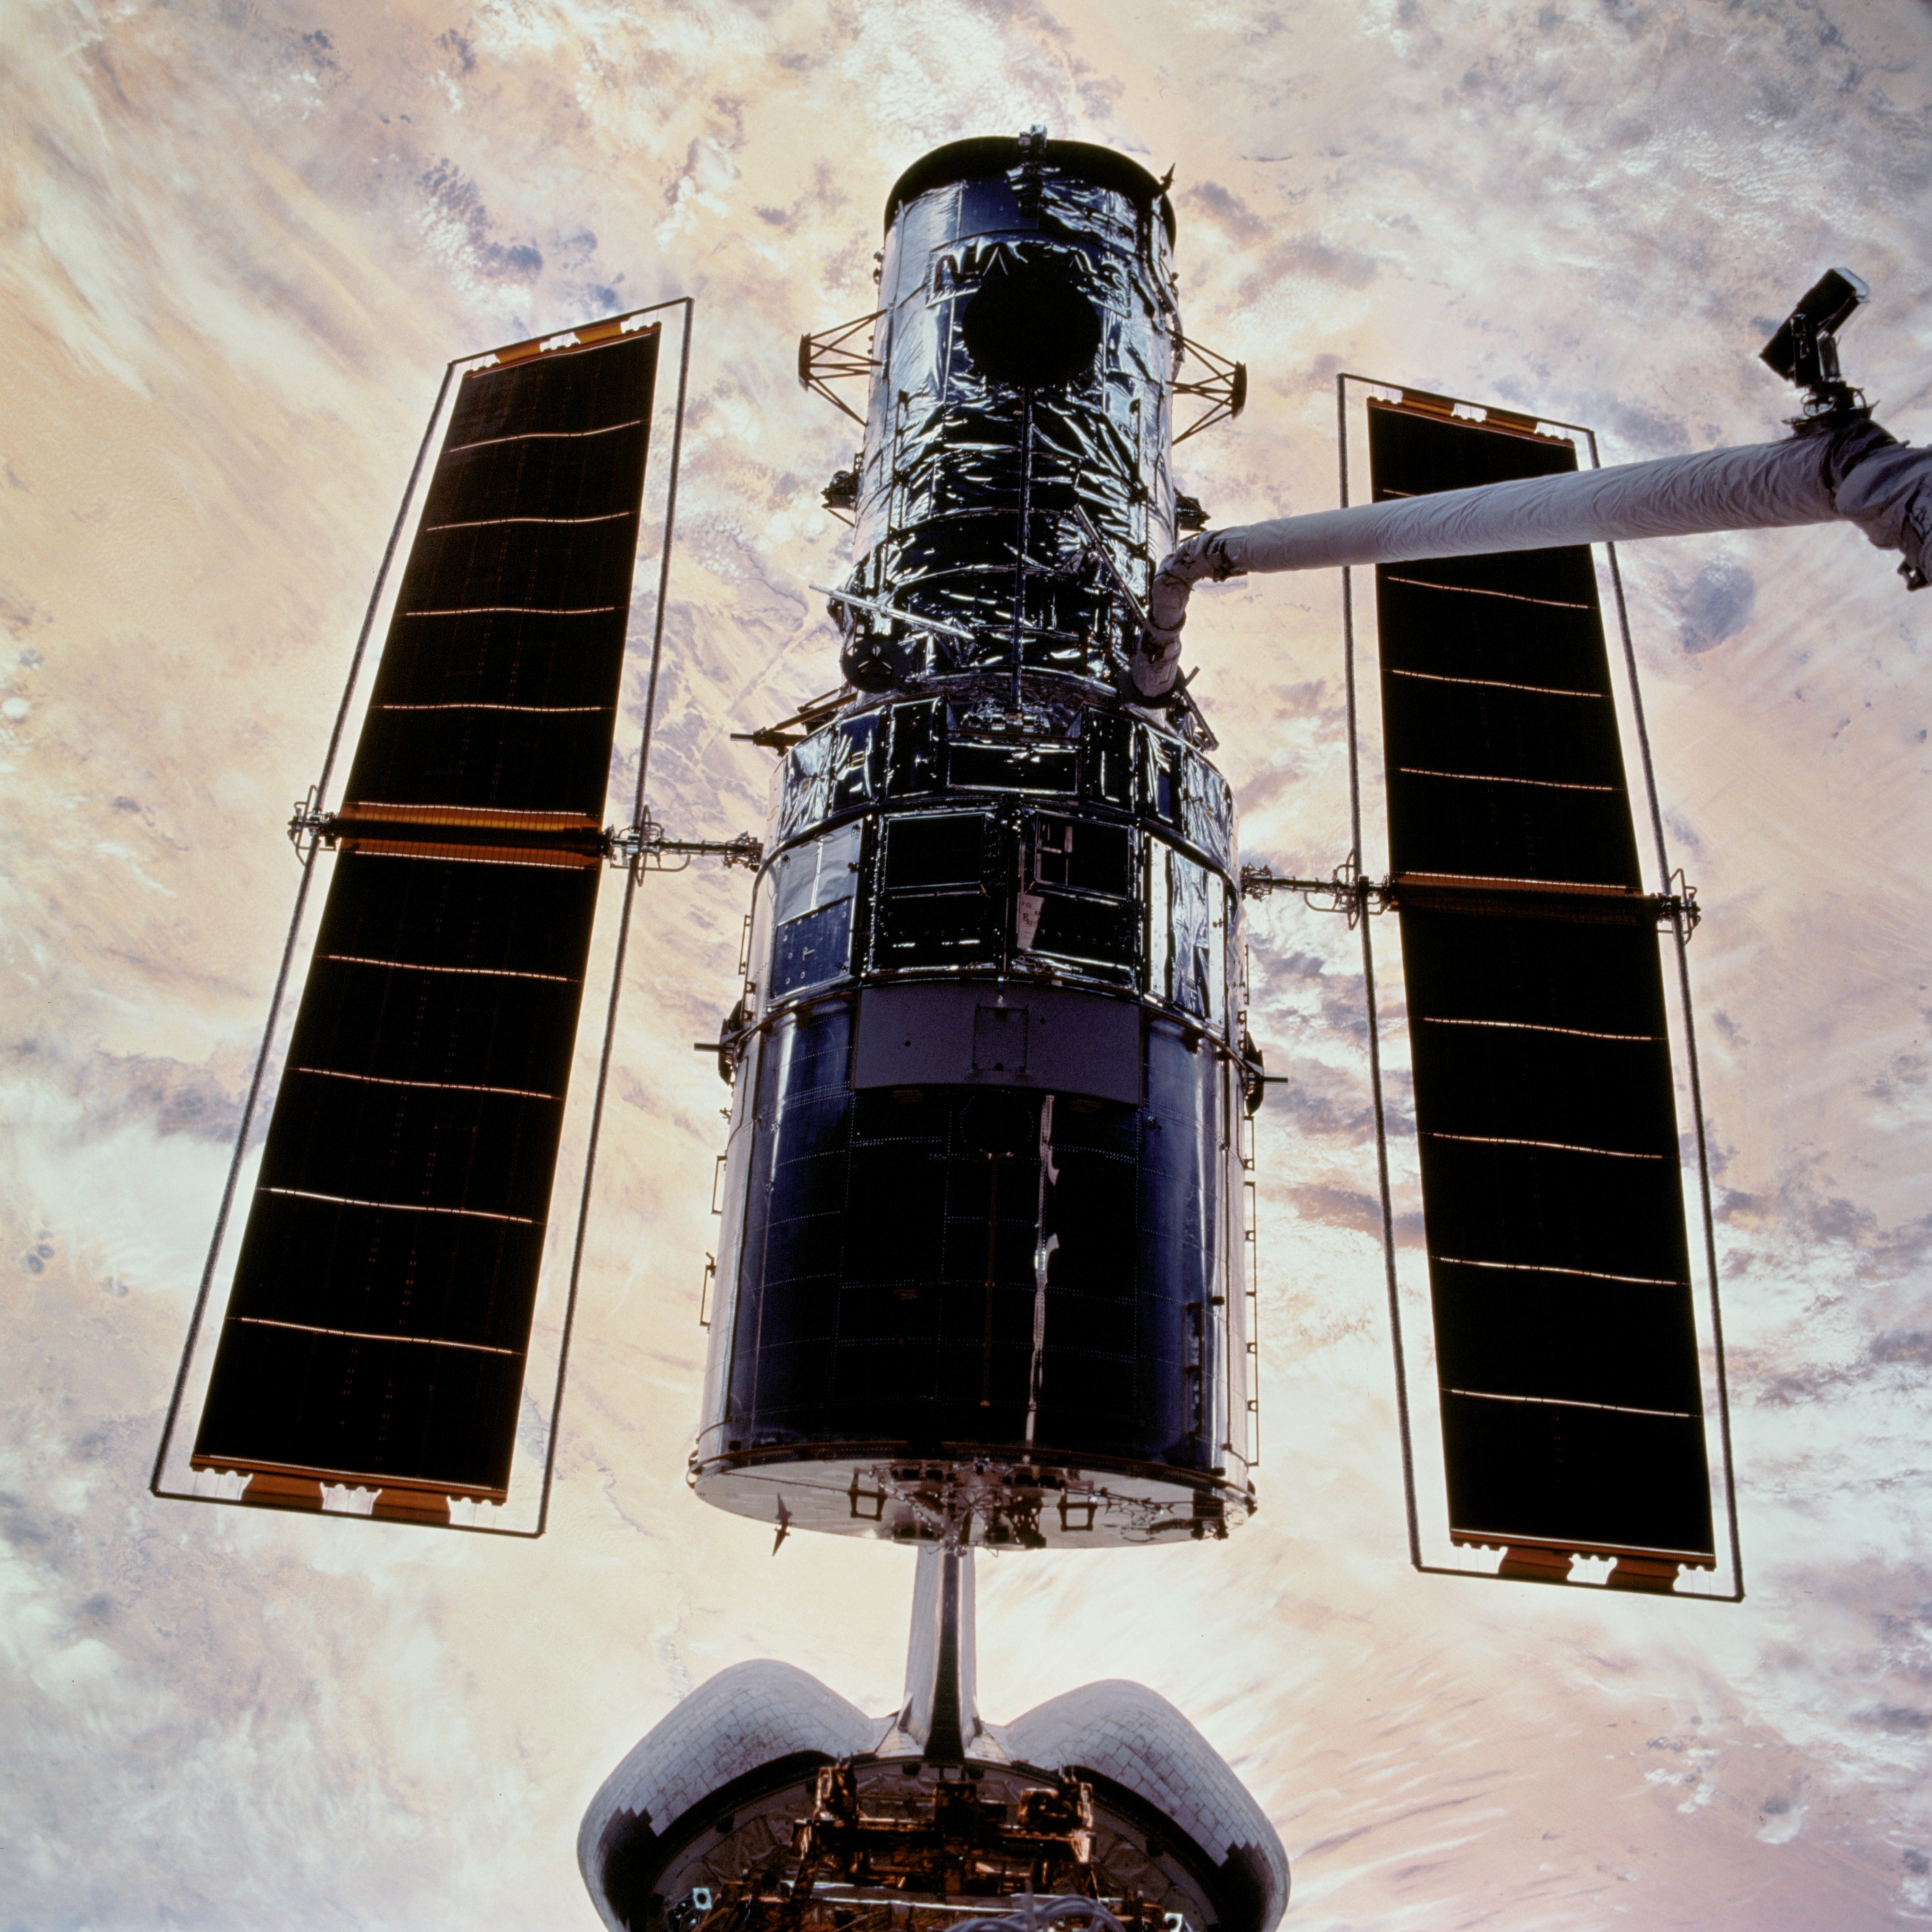 Hubble, on the end of the robotic arm after it was captured in space, is lowered onto its berthing hardware in the cargo bay, with a colorful section of earth below.